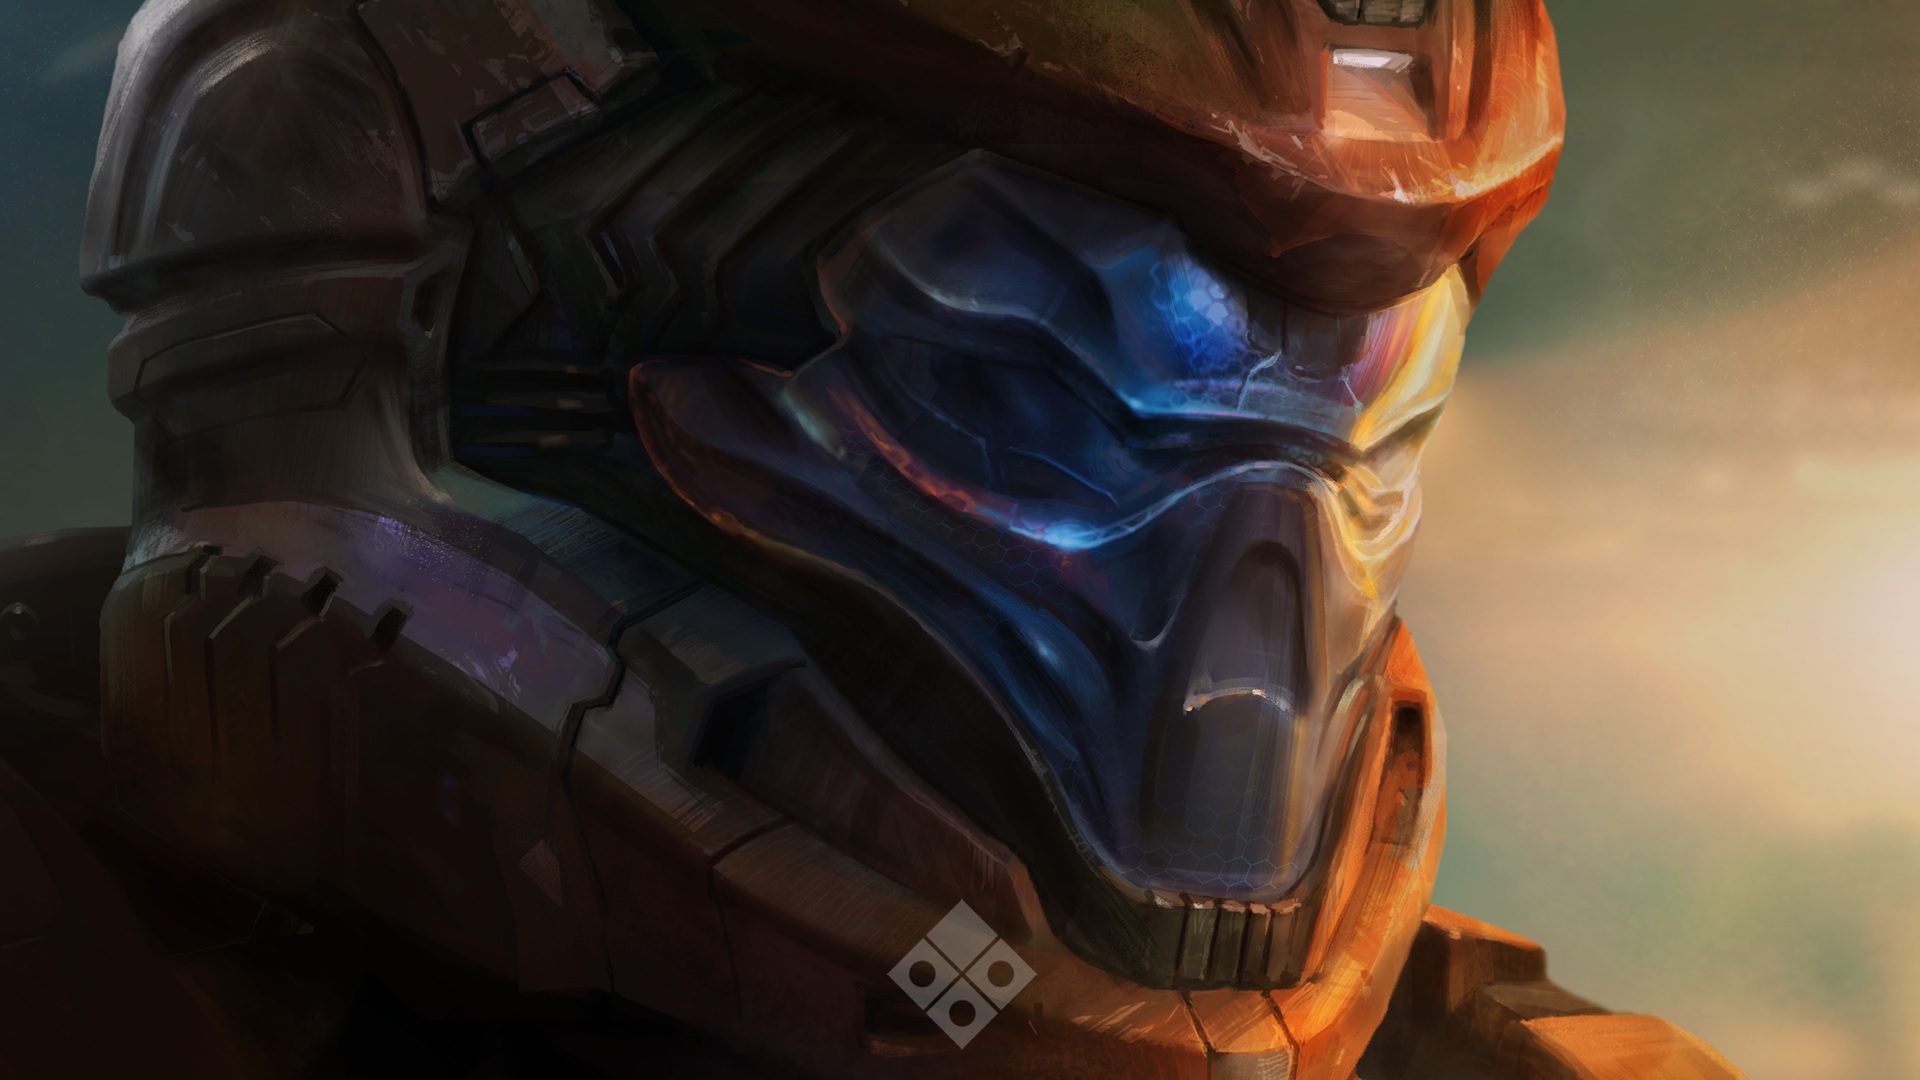 Header image for Canon Fodder Issue 140 showing the War Master-clad Spartan from Halo: Spartan Strike